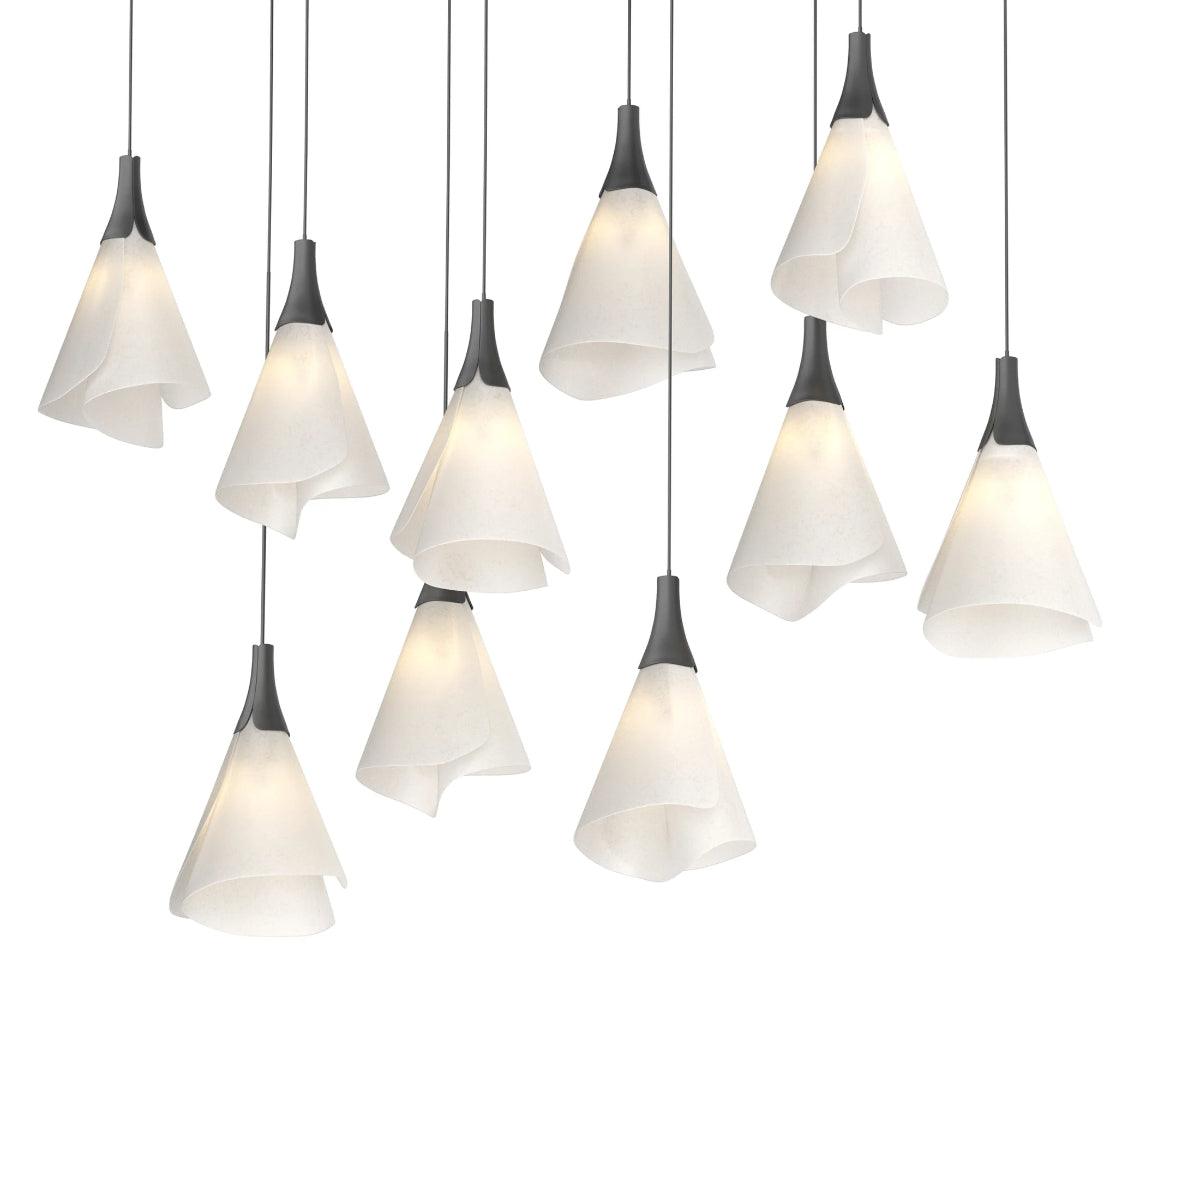 Mobius 46 in. 10 Lights Linear Pendant Light with Long